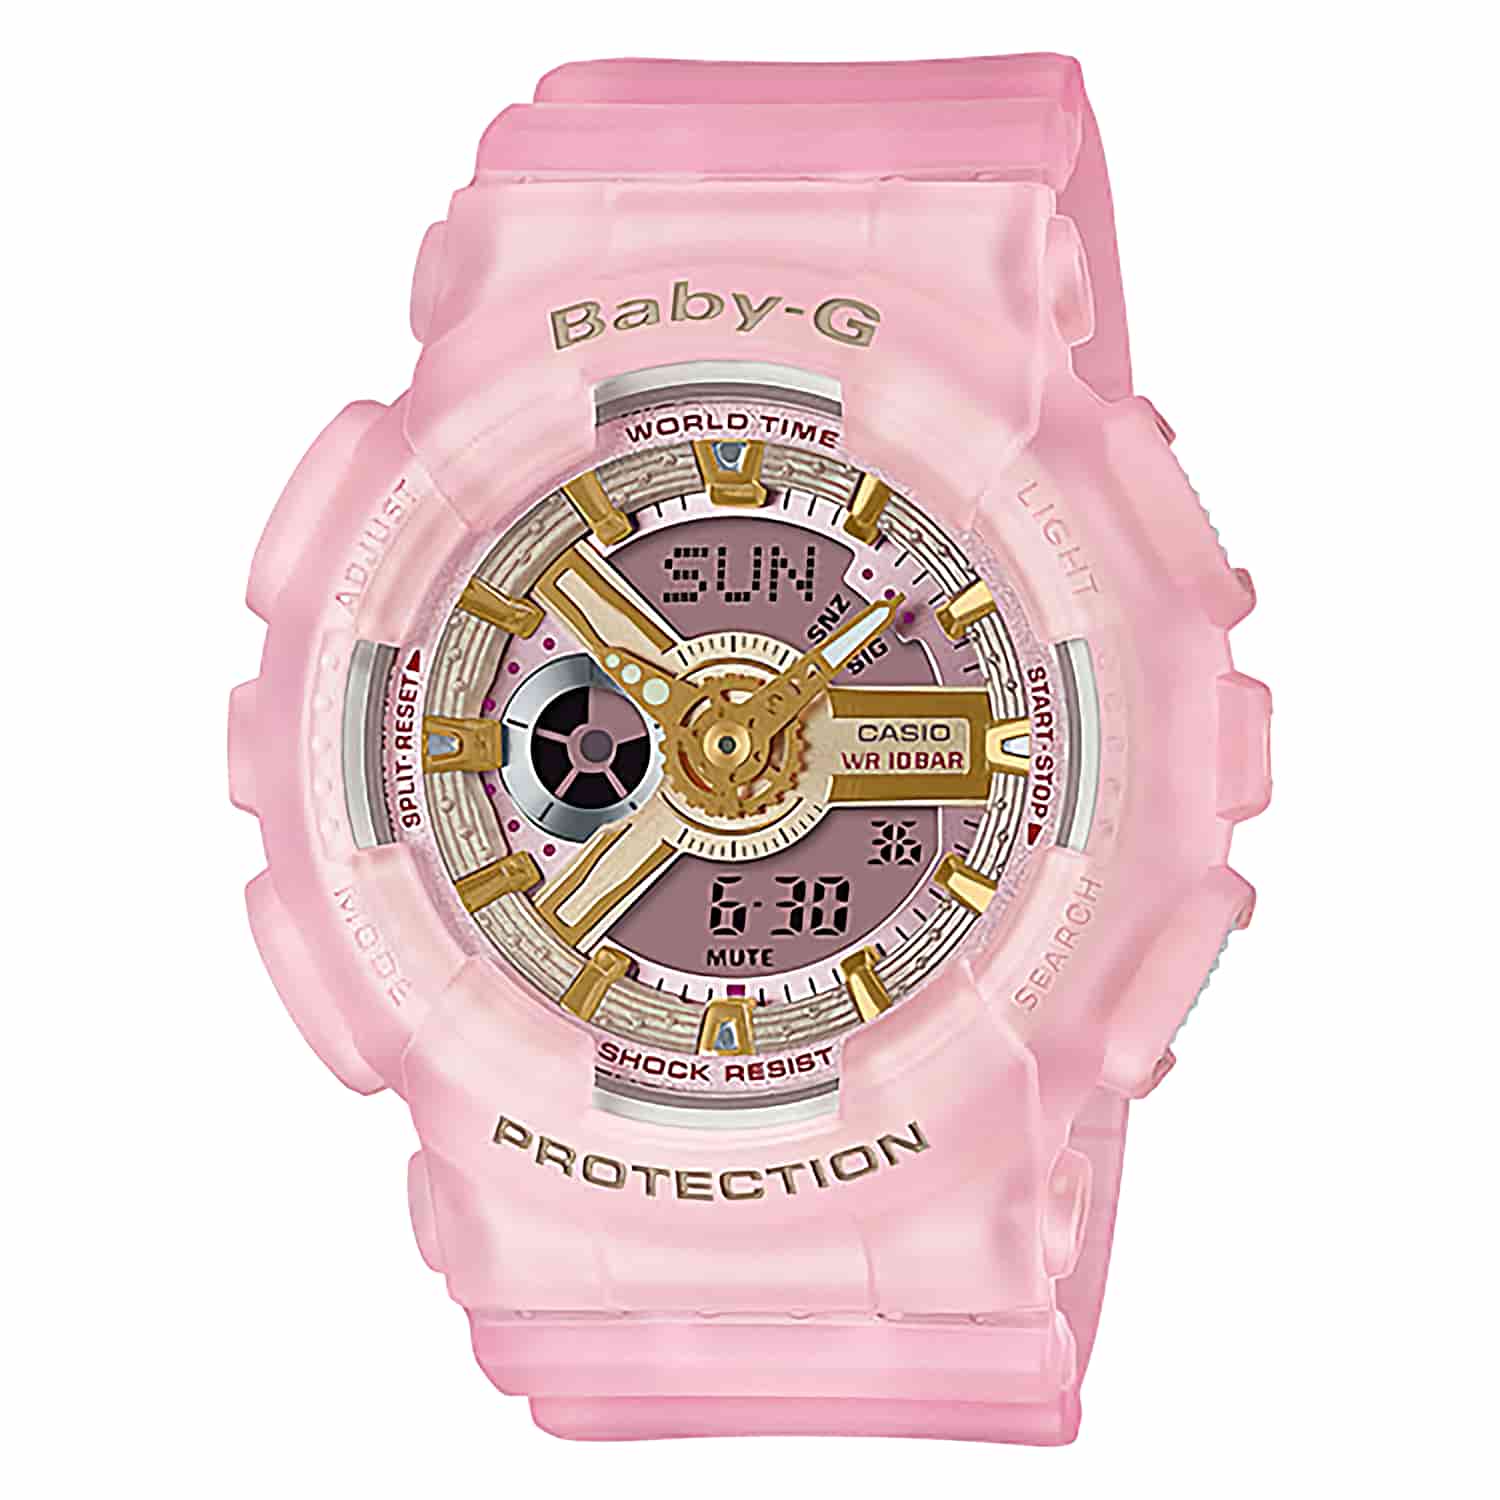 BA110SC-4A Casio BABY-G Special Colour Watch. From BABY-G, the casual watch for active women, come new models decorated with sea glass colours. Sea glass is natural frosted glass found on beaches along bodies of salt water, which takes decades to acquire 